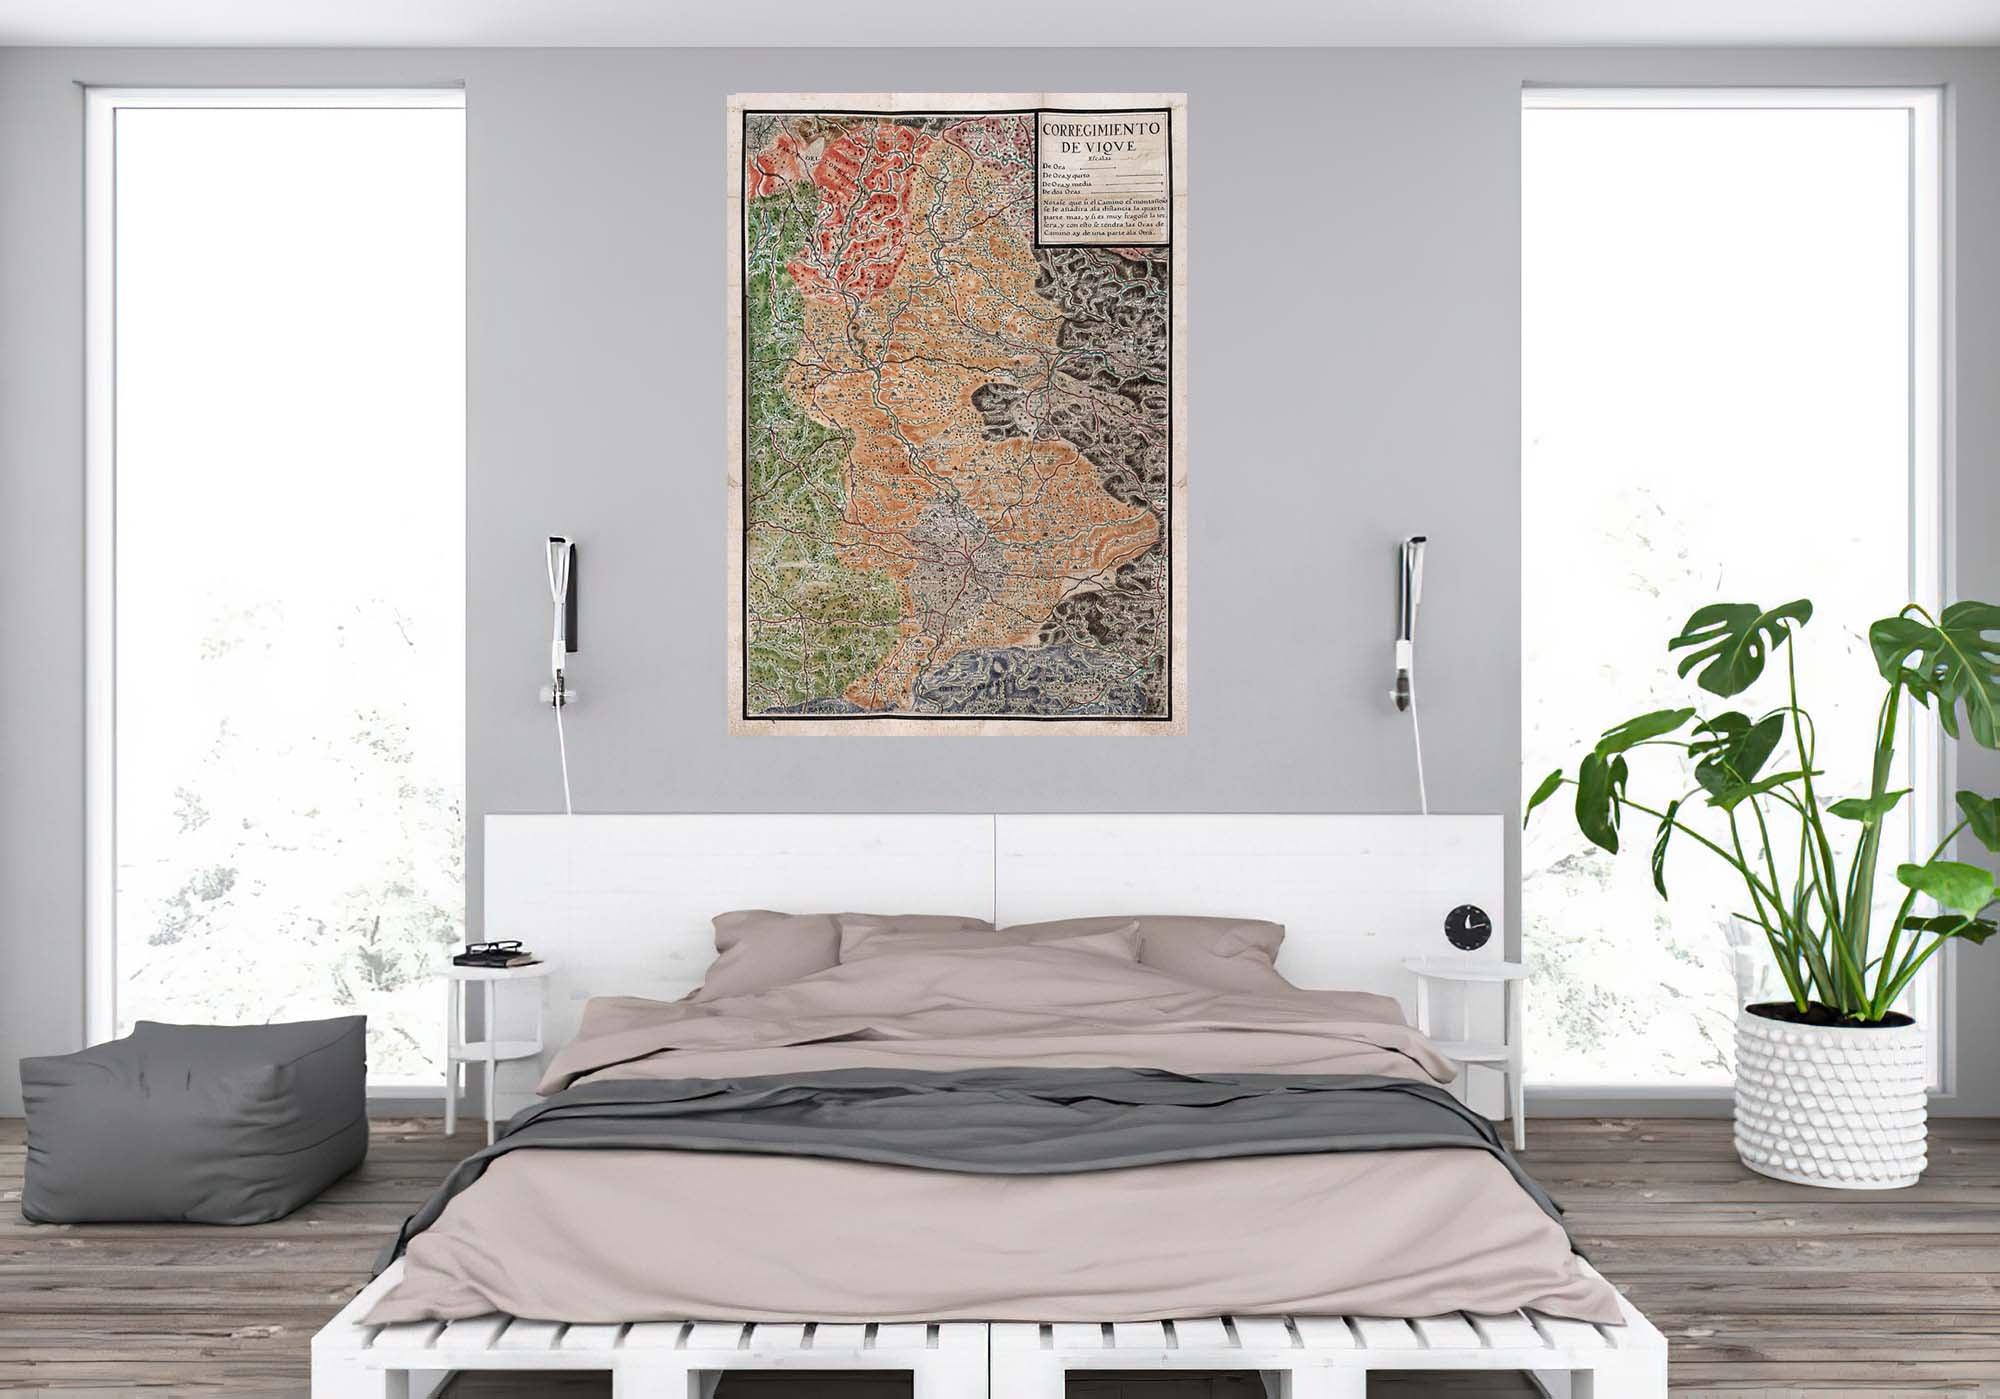 CoolWalls.ca diecut Map of Darnius Made in 1795, Wall Decal Sticker Wallpaper, PEEL-N-STICK, removable anytime. Great for a classroom